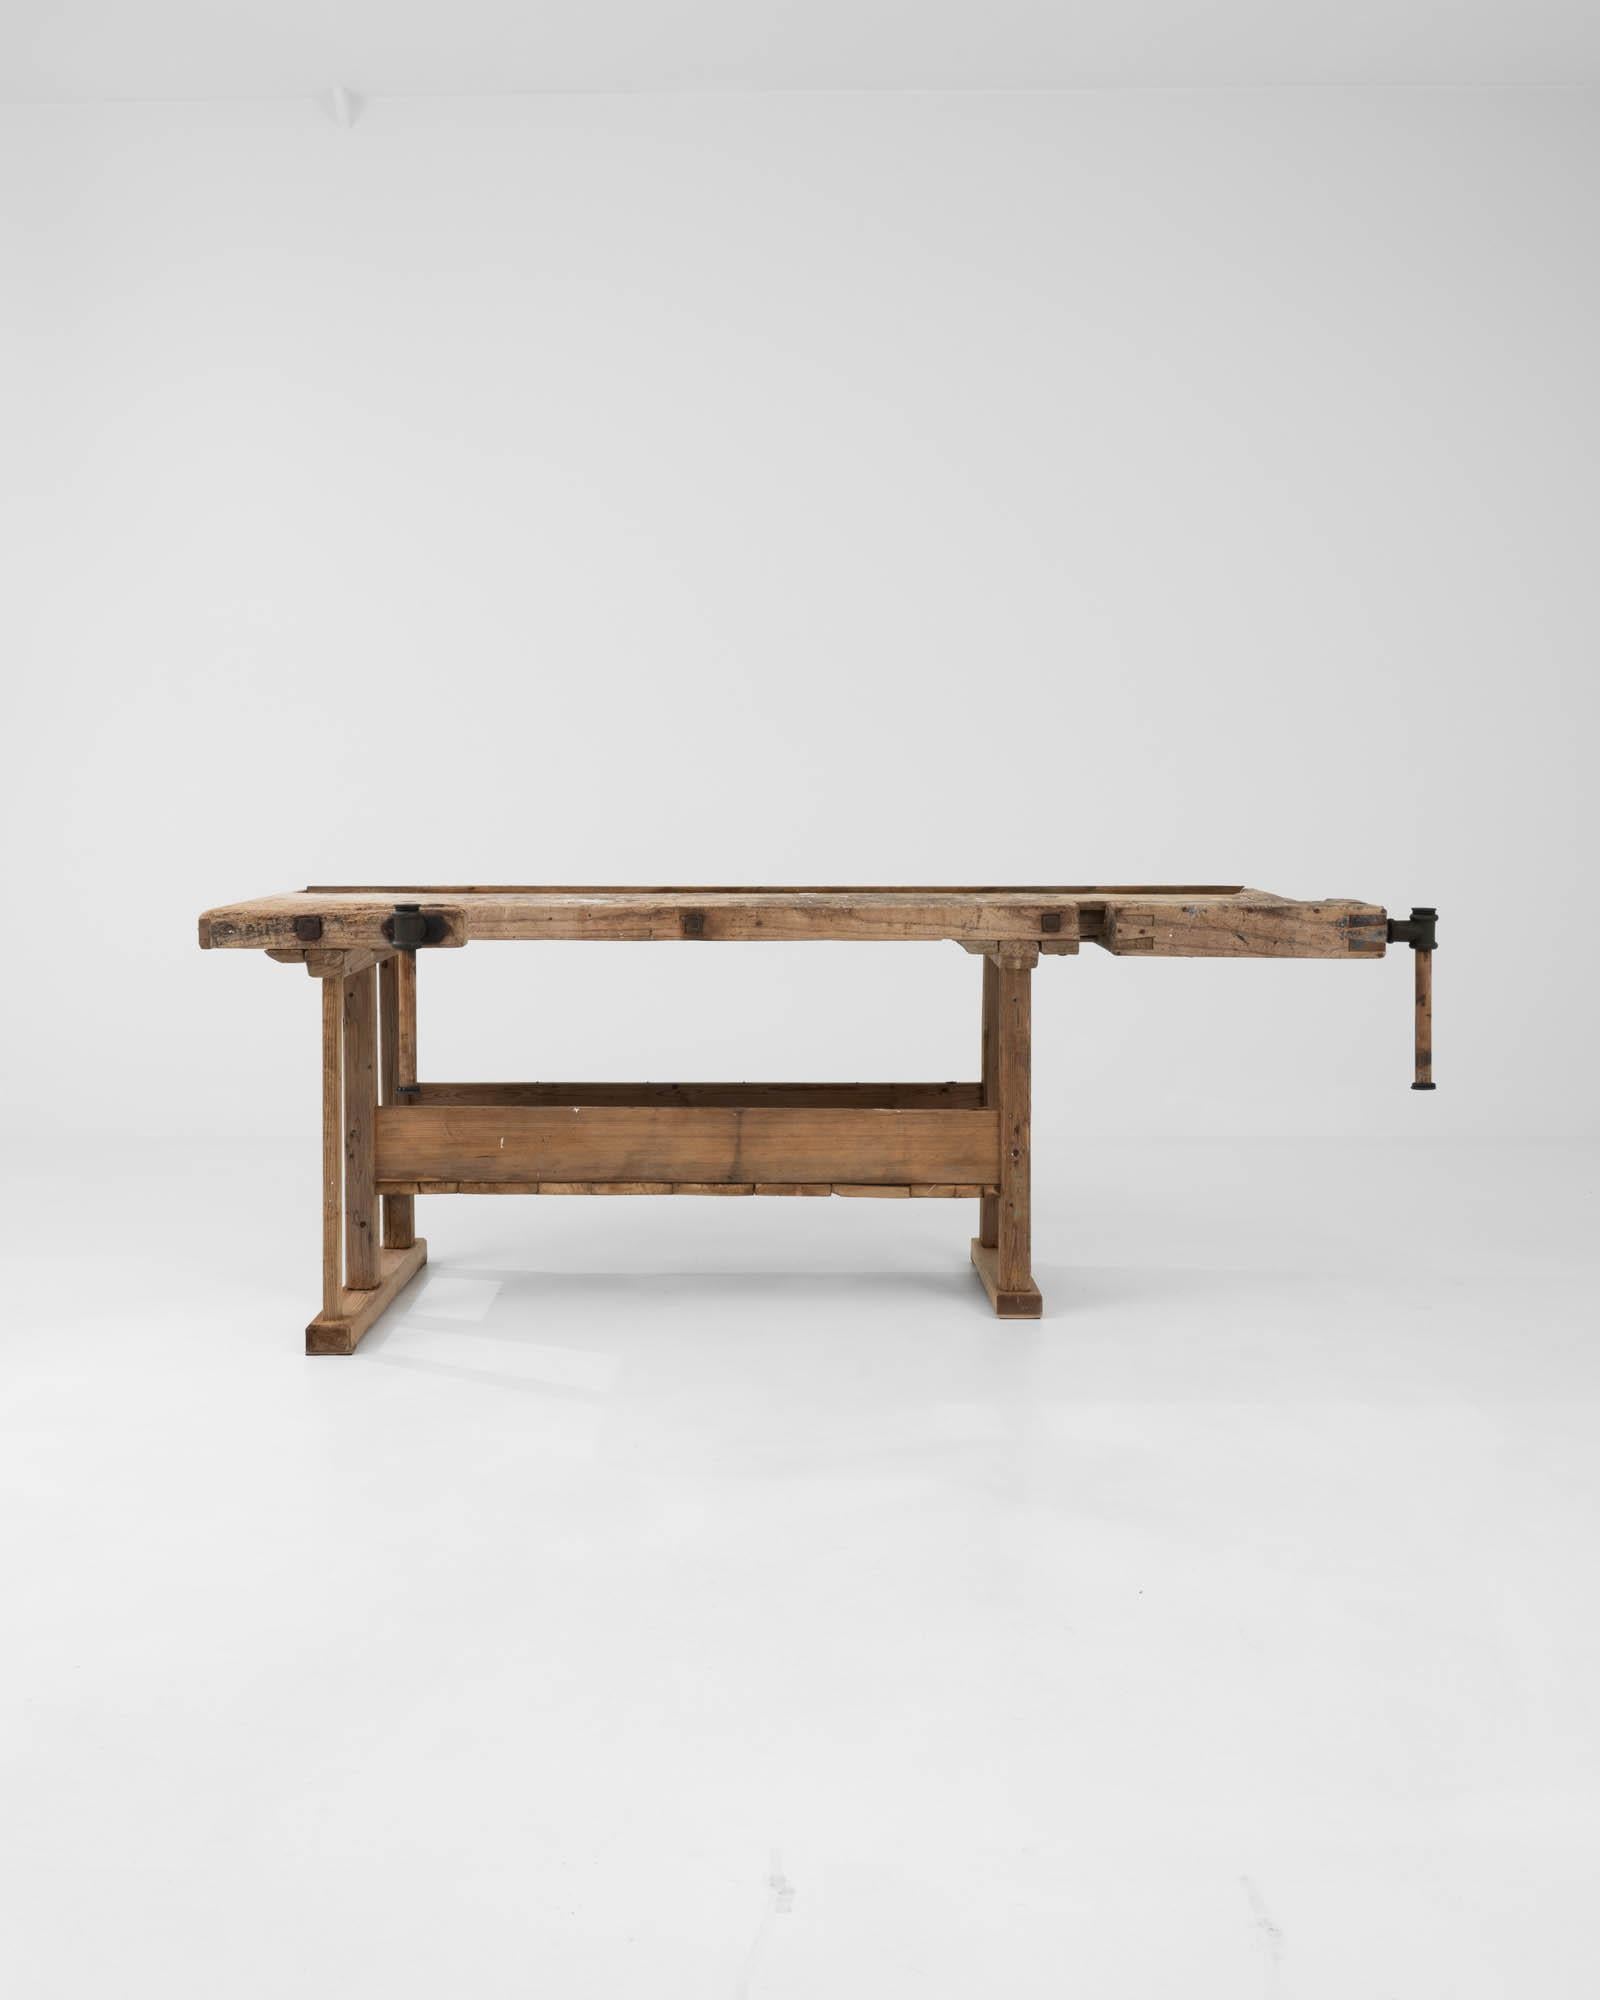 With its workmanlike design and warm natural finish, this vintage wooden table makes a striking Industrial accent. Built in Belgium in the 20th century, this piece would have originally been used as a carpenter’s work bench; the impressive metal